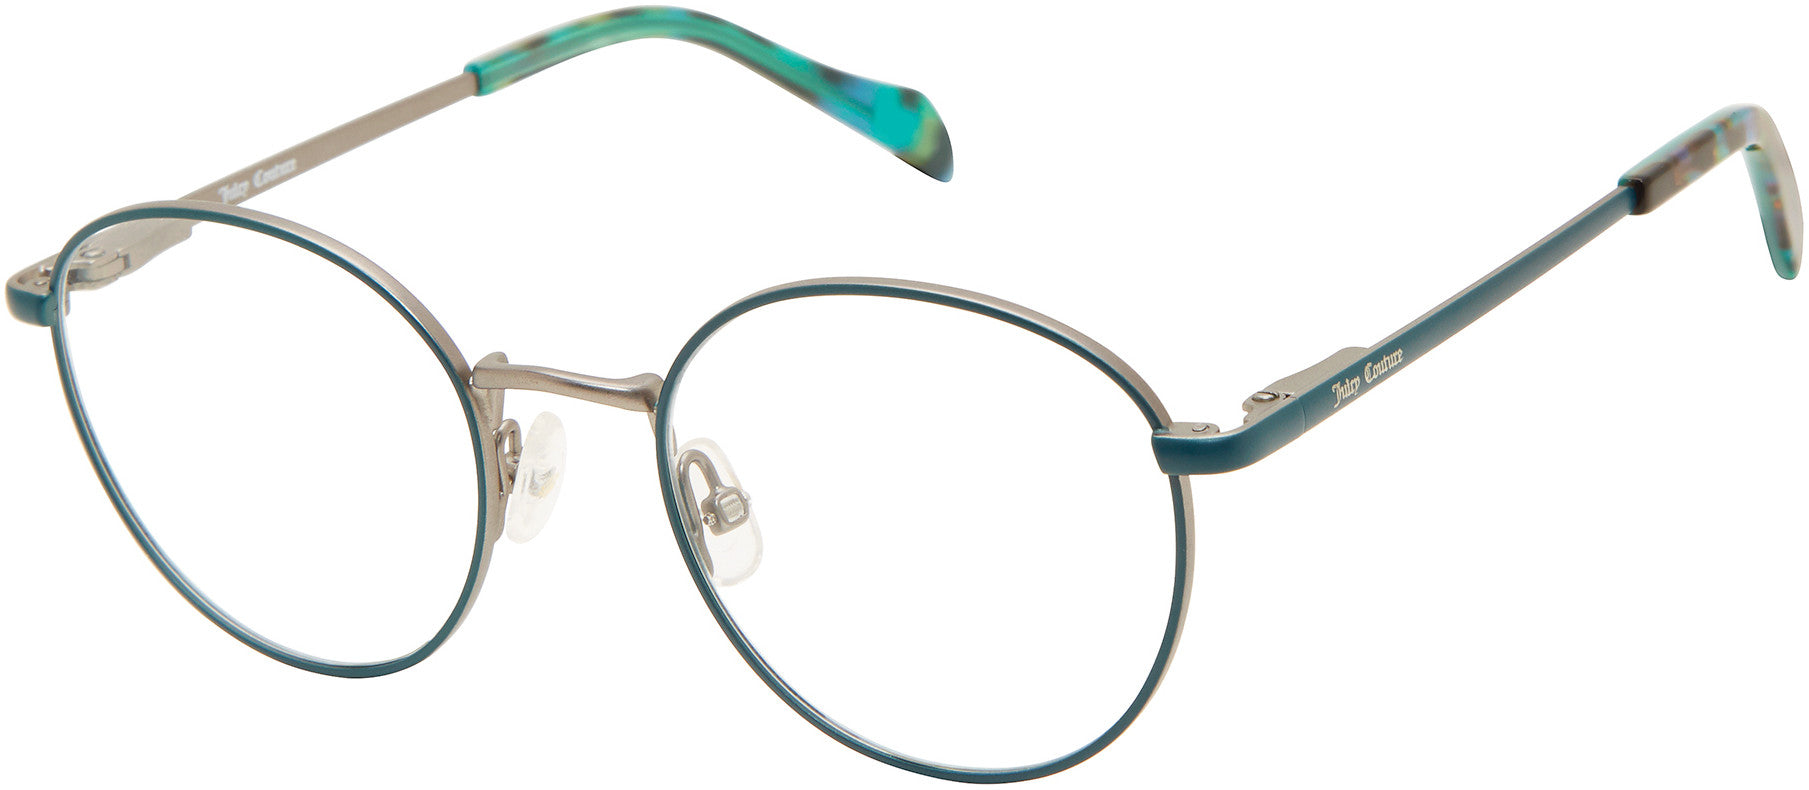 Juicy Couture Juicy 937 Oval Modified Eyeglasses 0PYW-0PYW  Matte Teal (00 Demo Lens)